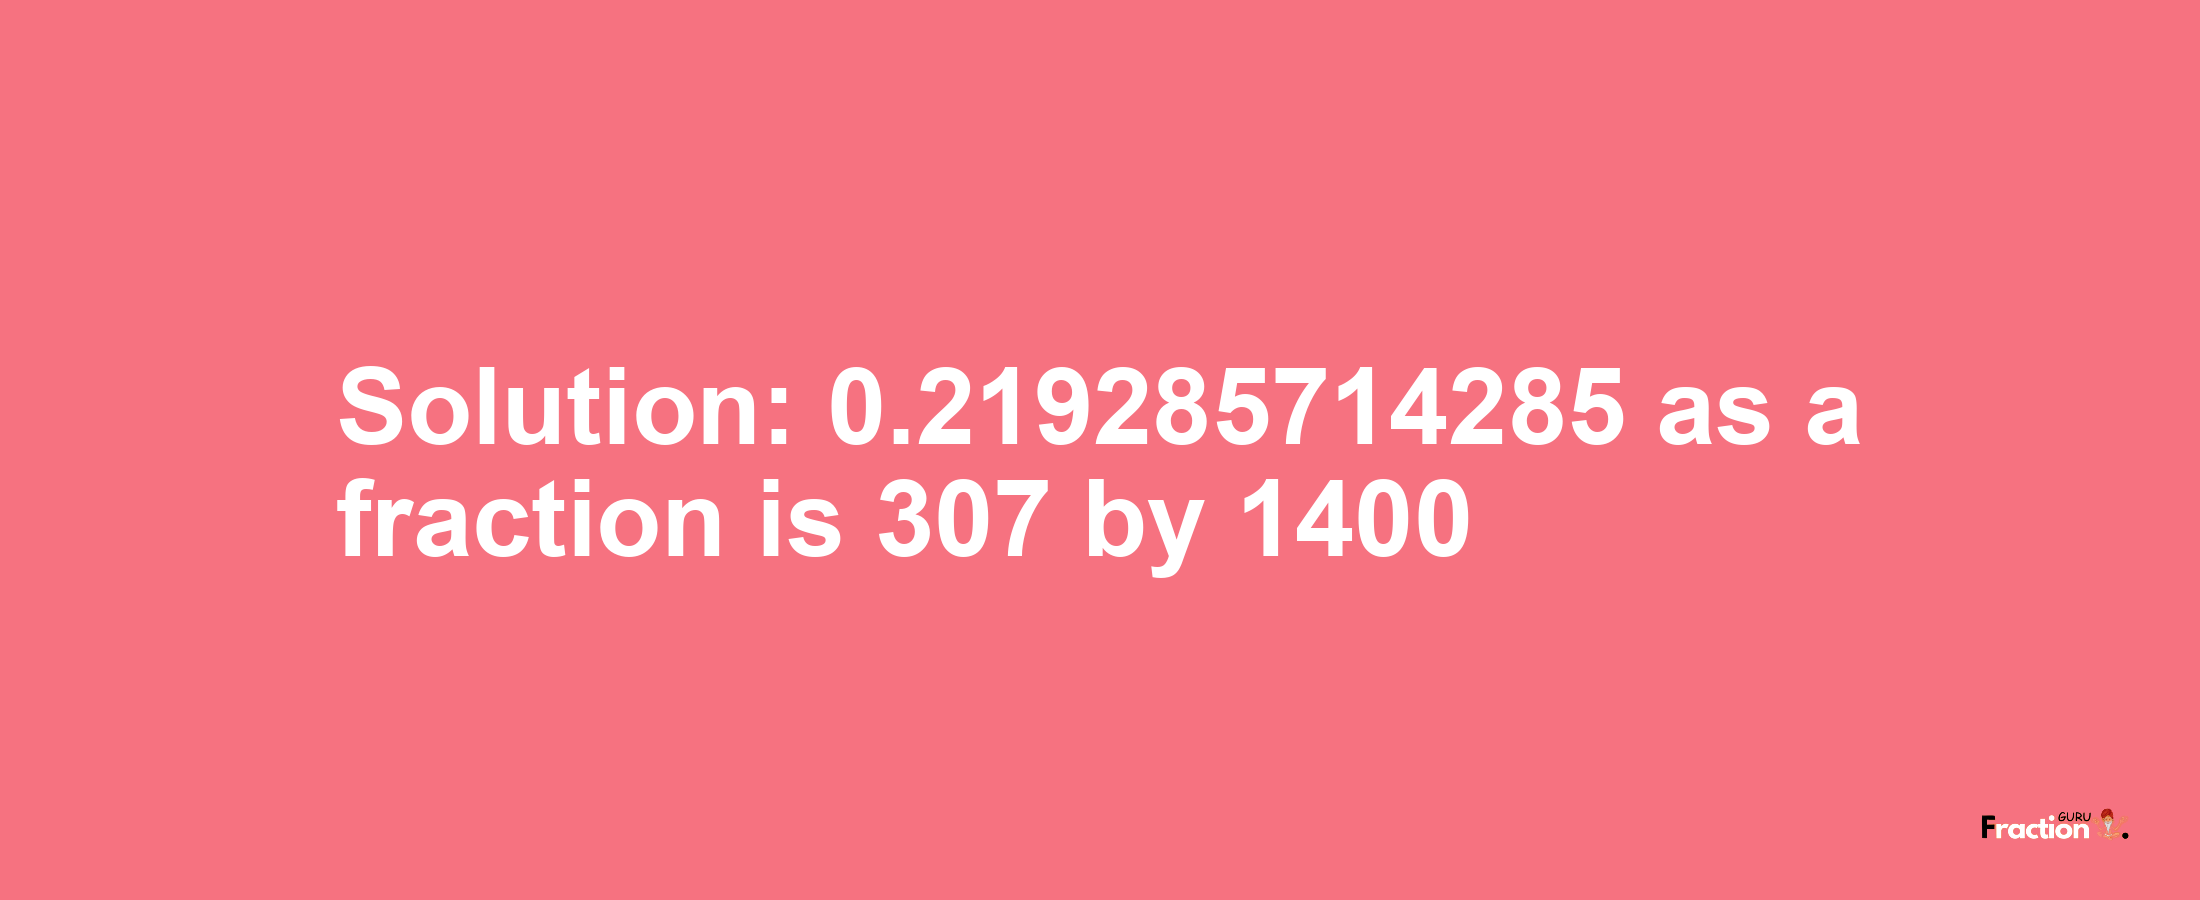 Solution:0.219285714285 as a fraction is 307/1400